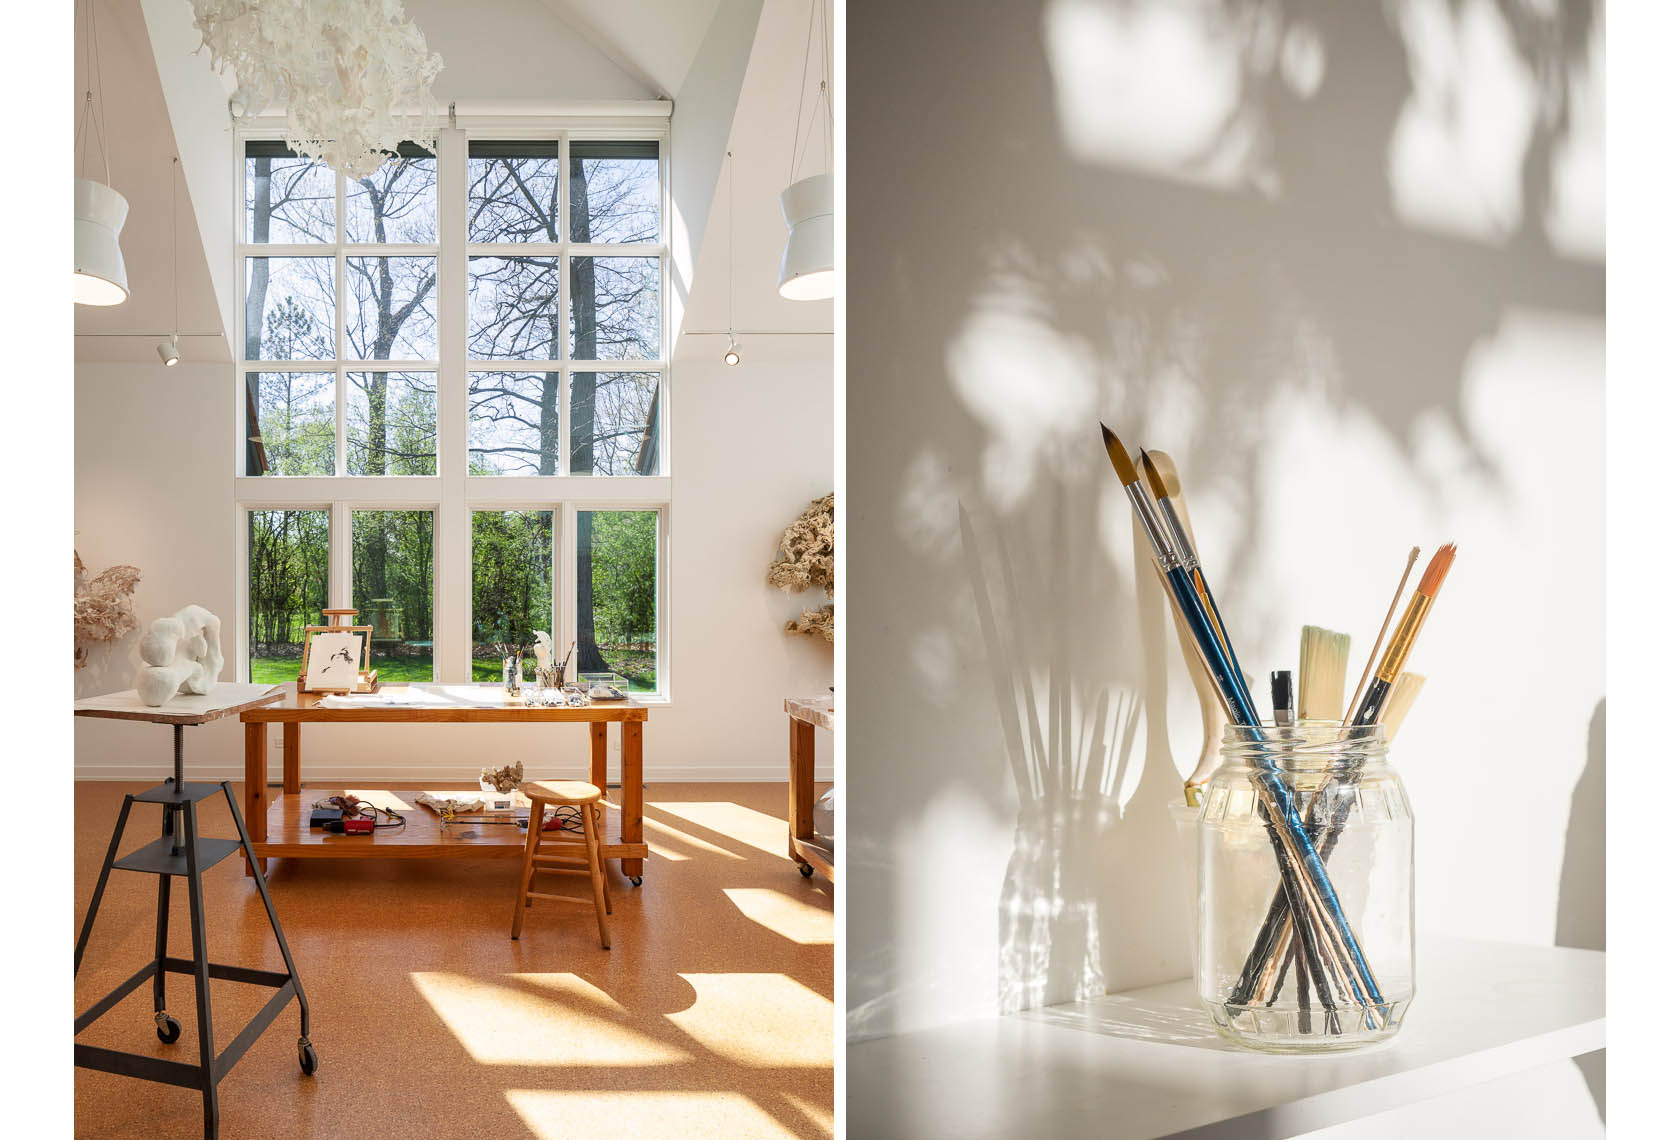 Artist studio with large window, white walls and jar of paint brushes